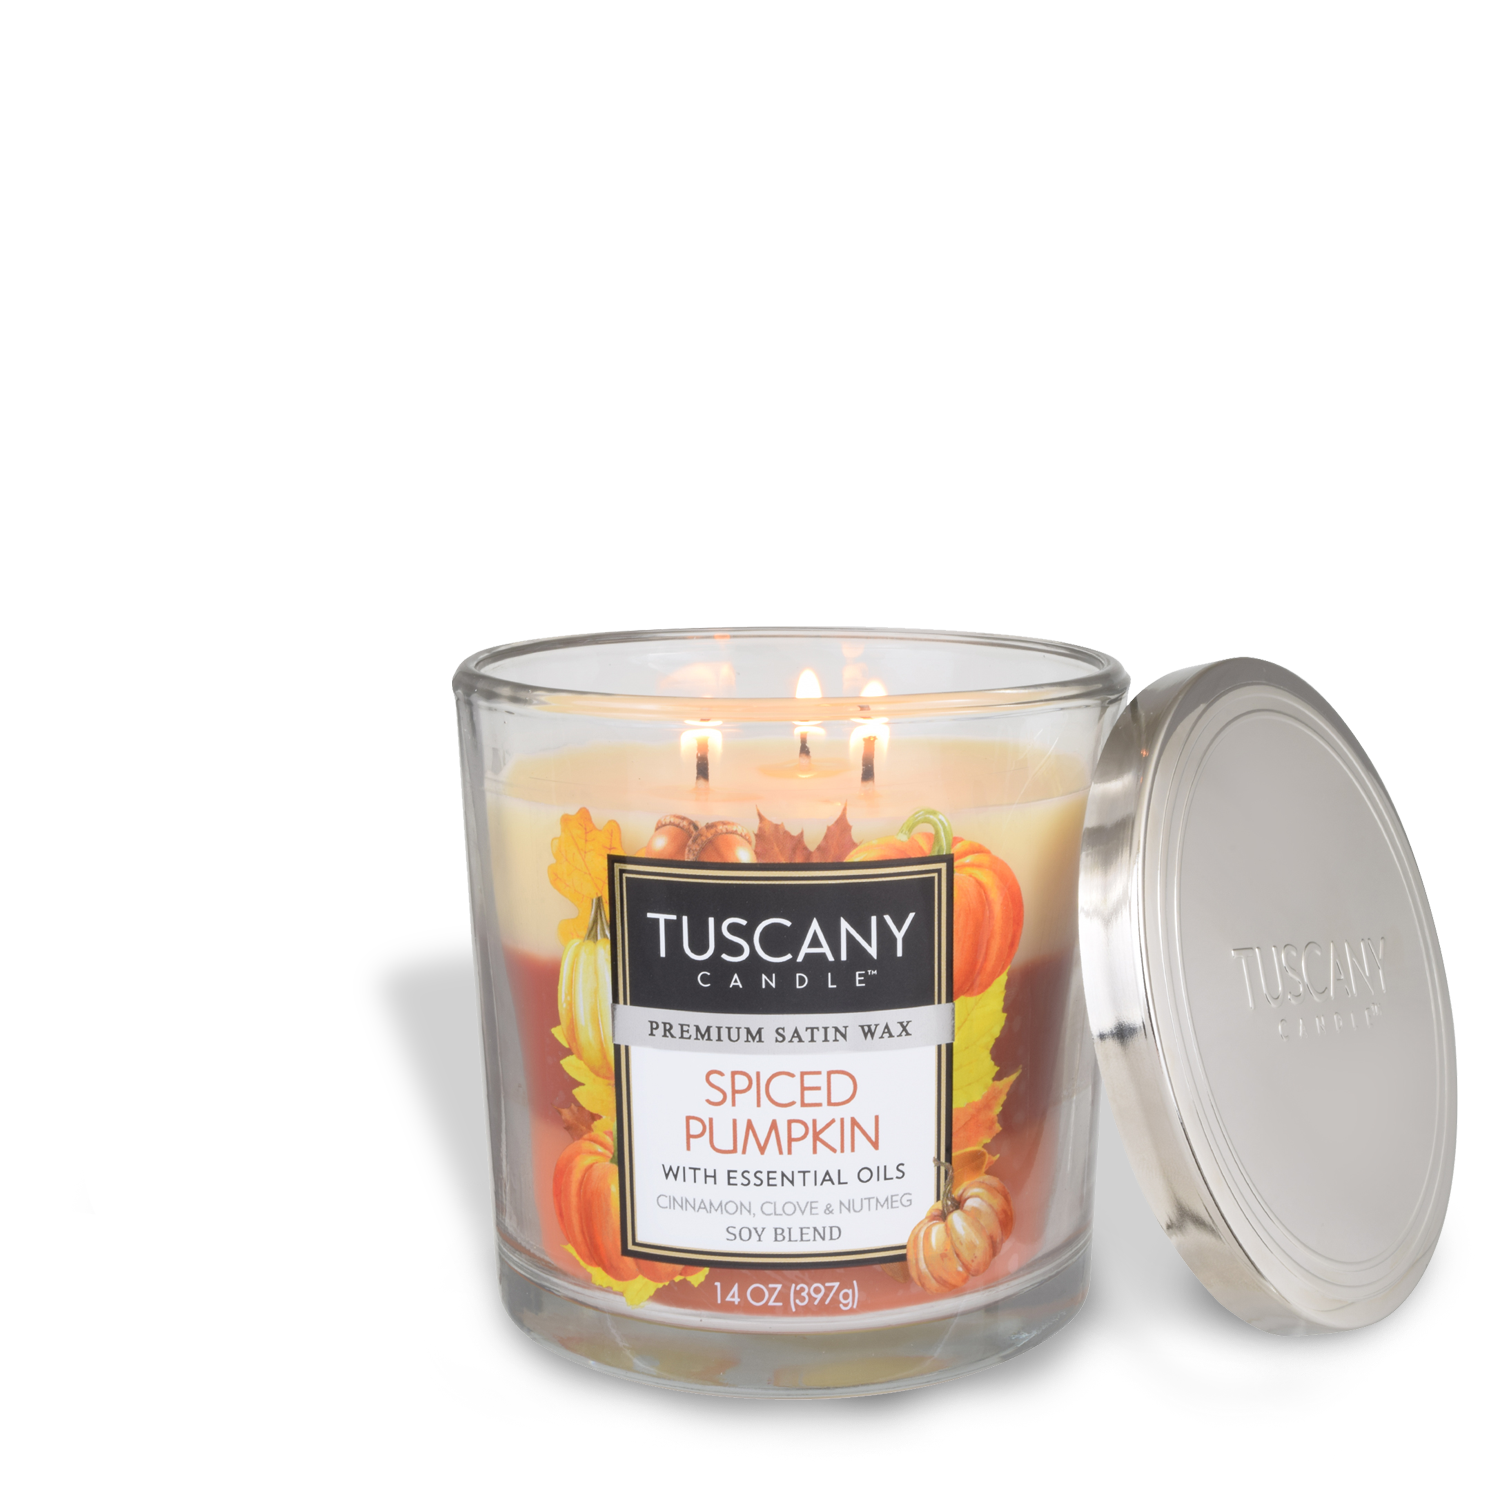 Tuscany spiced pumpkin candle with hints of cinnamon and clove.